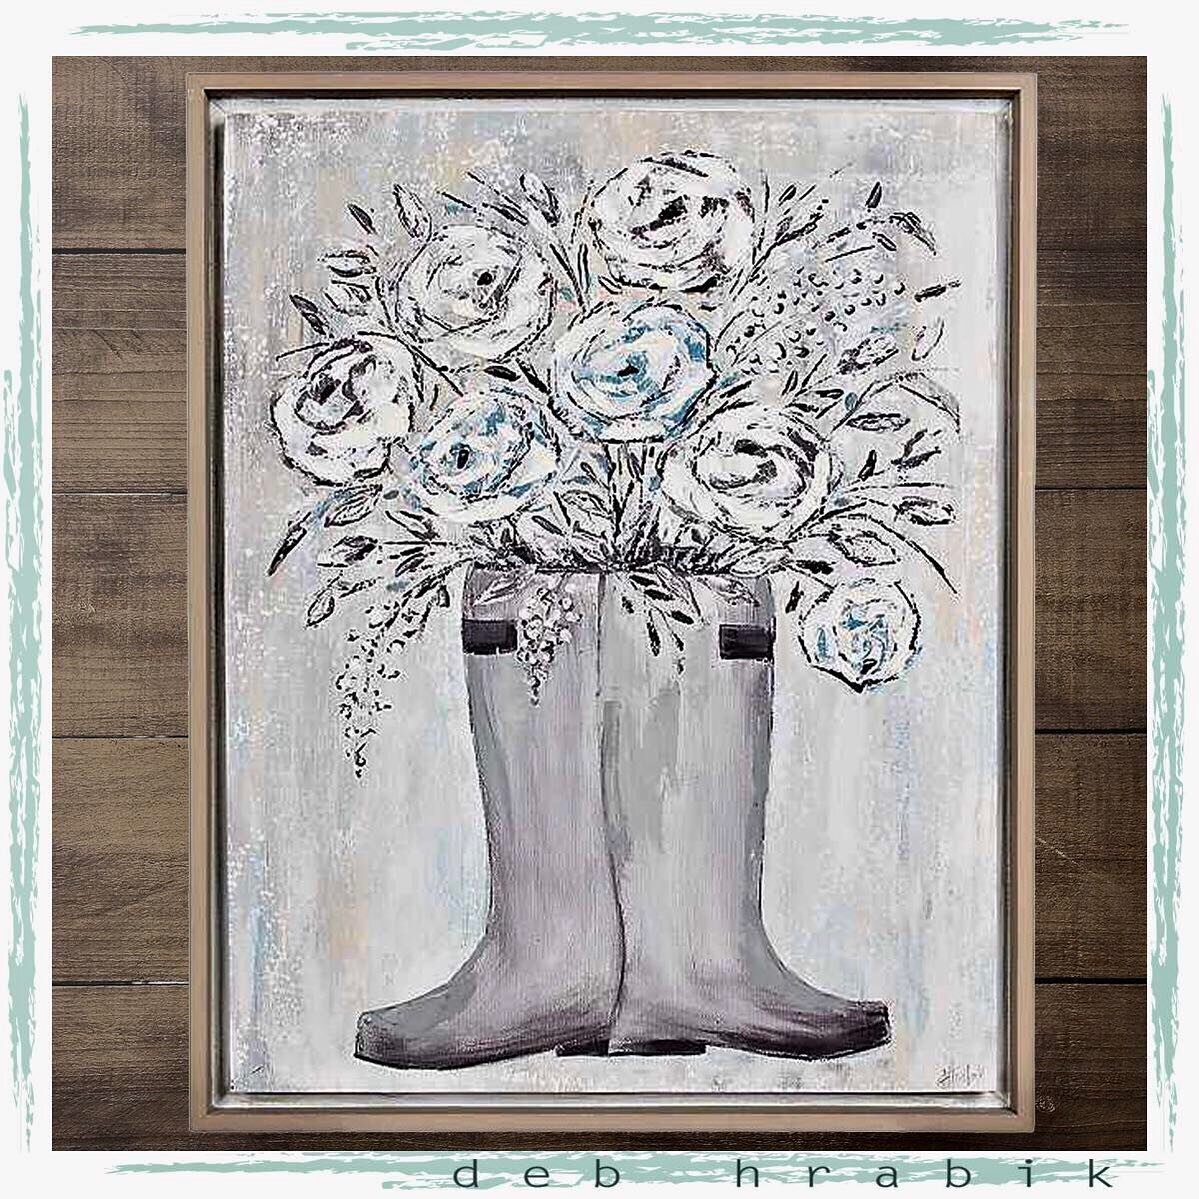 New @kirklands - my &ldquo;Boots and Blooms&rdquo; Framed Canvas Art Print.
I like that it is a large 24&rdquo;x 30&rdquo; . $59.99, but they usually offer a coupon code too. 🤗
.
.
#homedecor #wallart #paletteknife #paletteknifepainting #artprints #